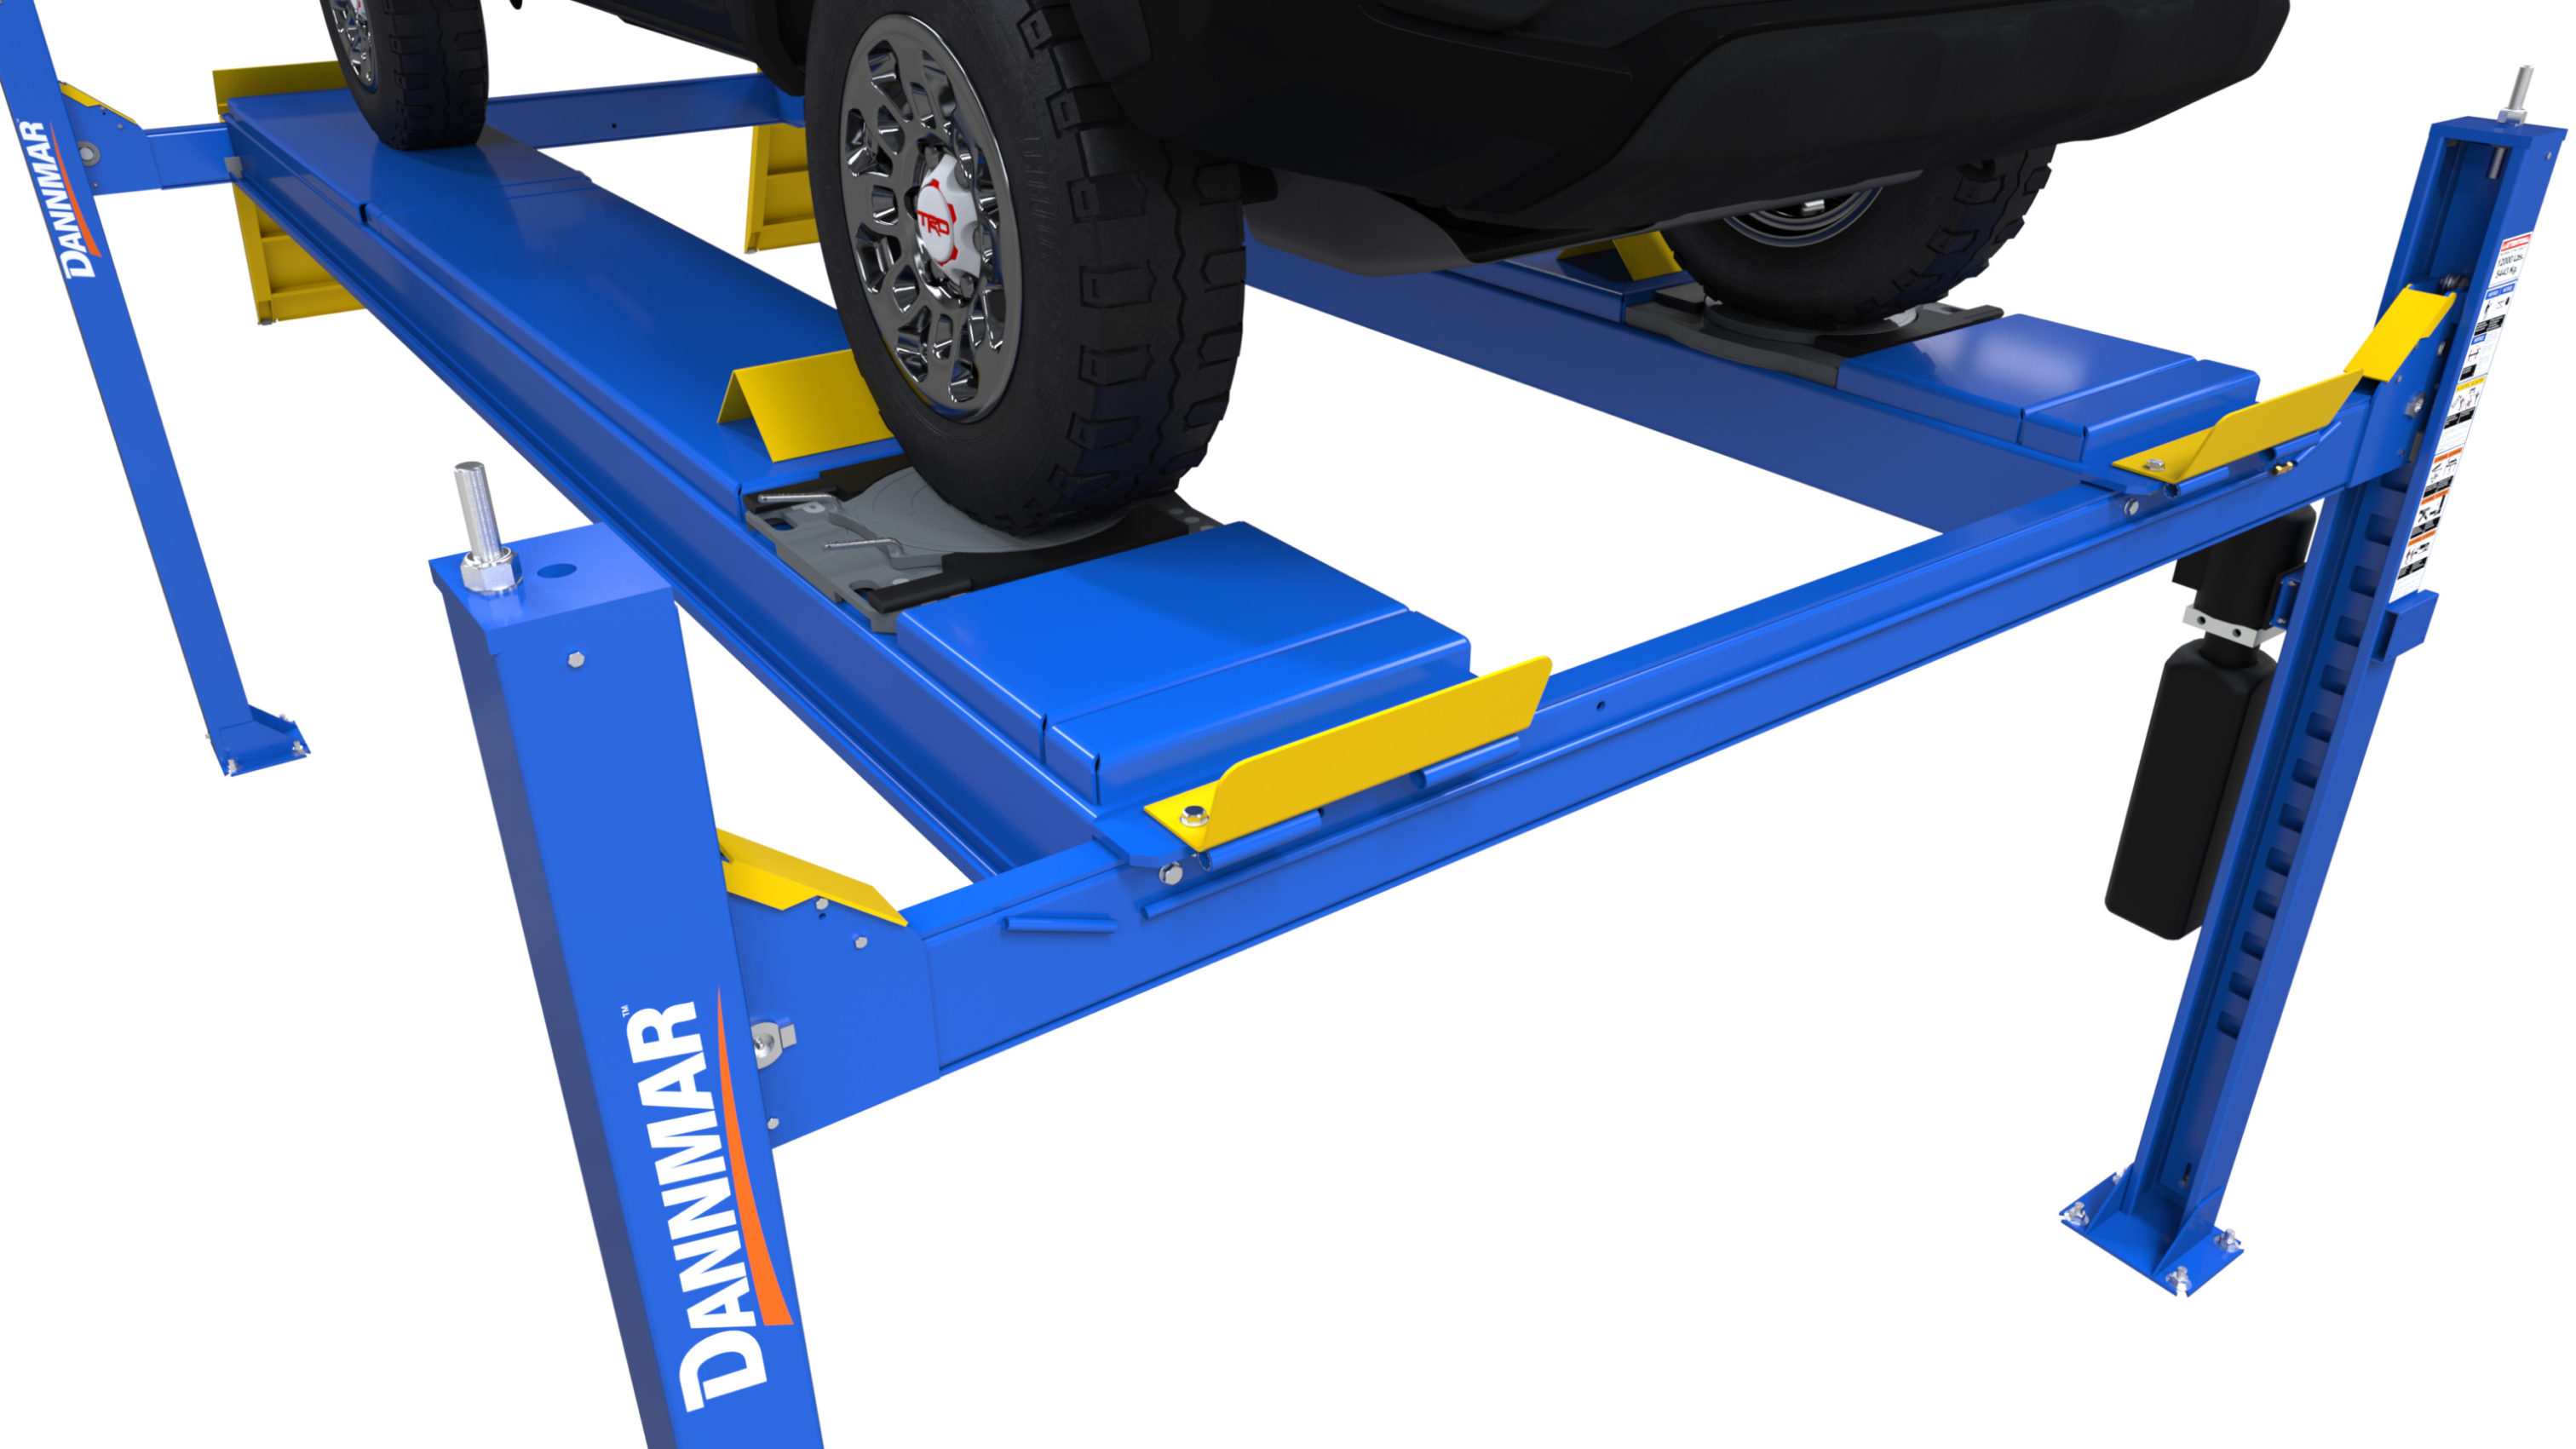 The new D4-12A alignment lift from Dannmar can be used to perform two- or four-wheel alignments and general service work on cars, SUVs and light trucks weighing up to 12,000 pounds. 